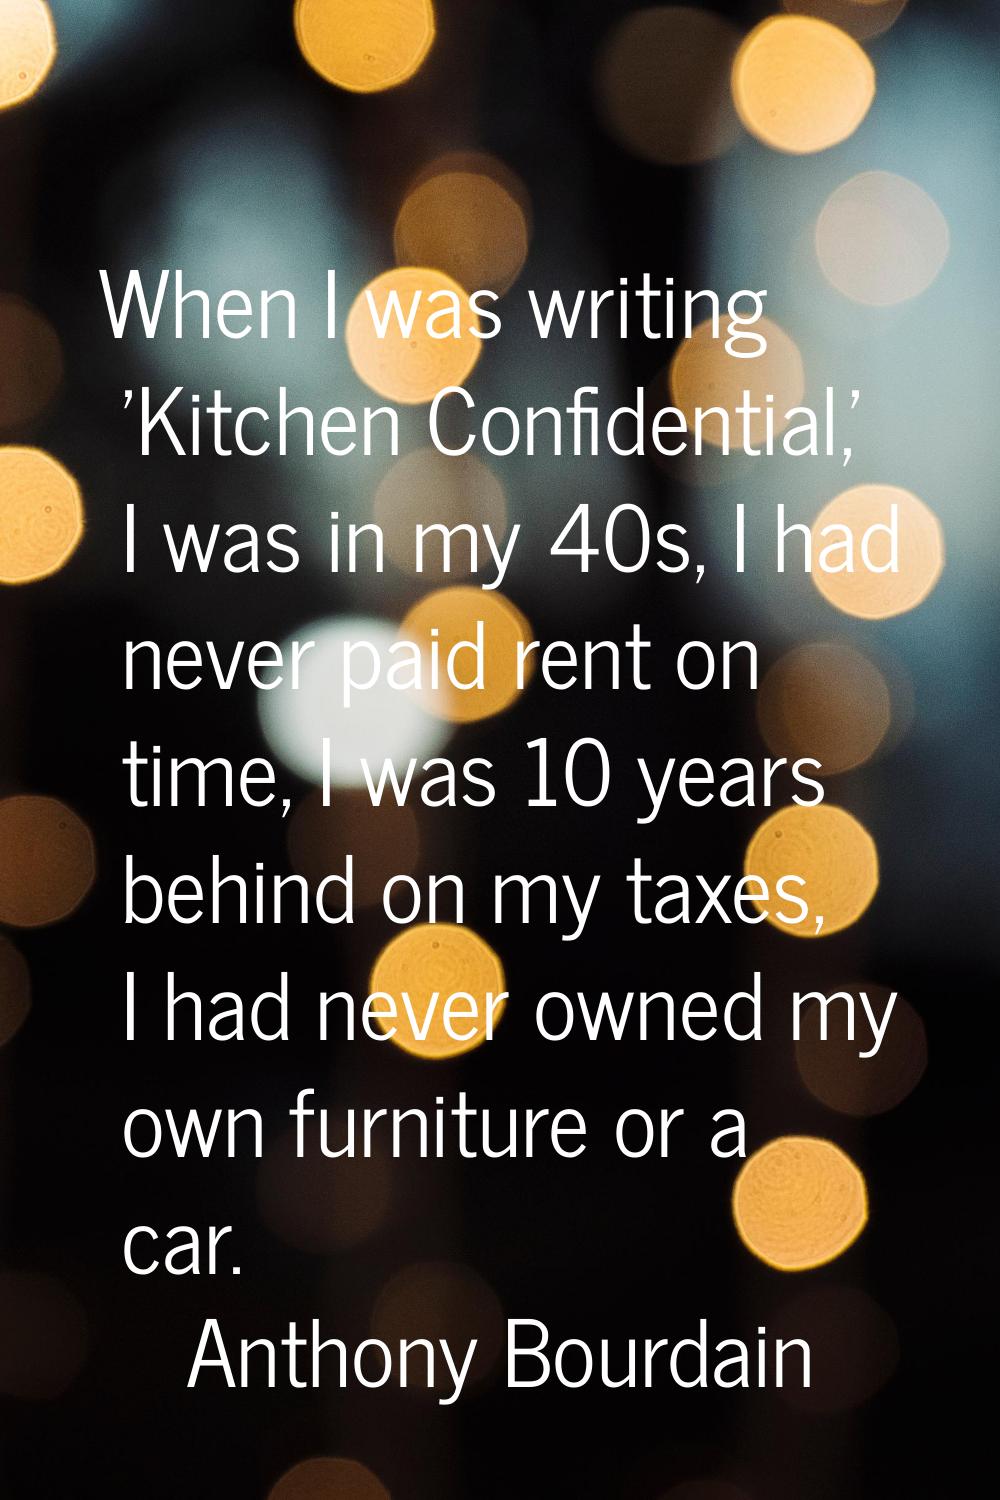 When I was writing 'Kitchen Confidential,' I was in my 40s, I had never paid rent on time, I was 10